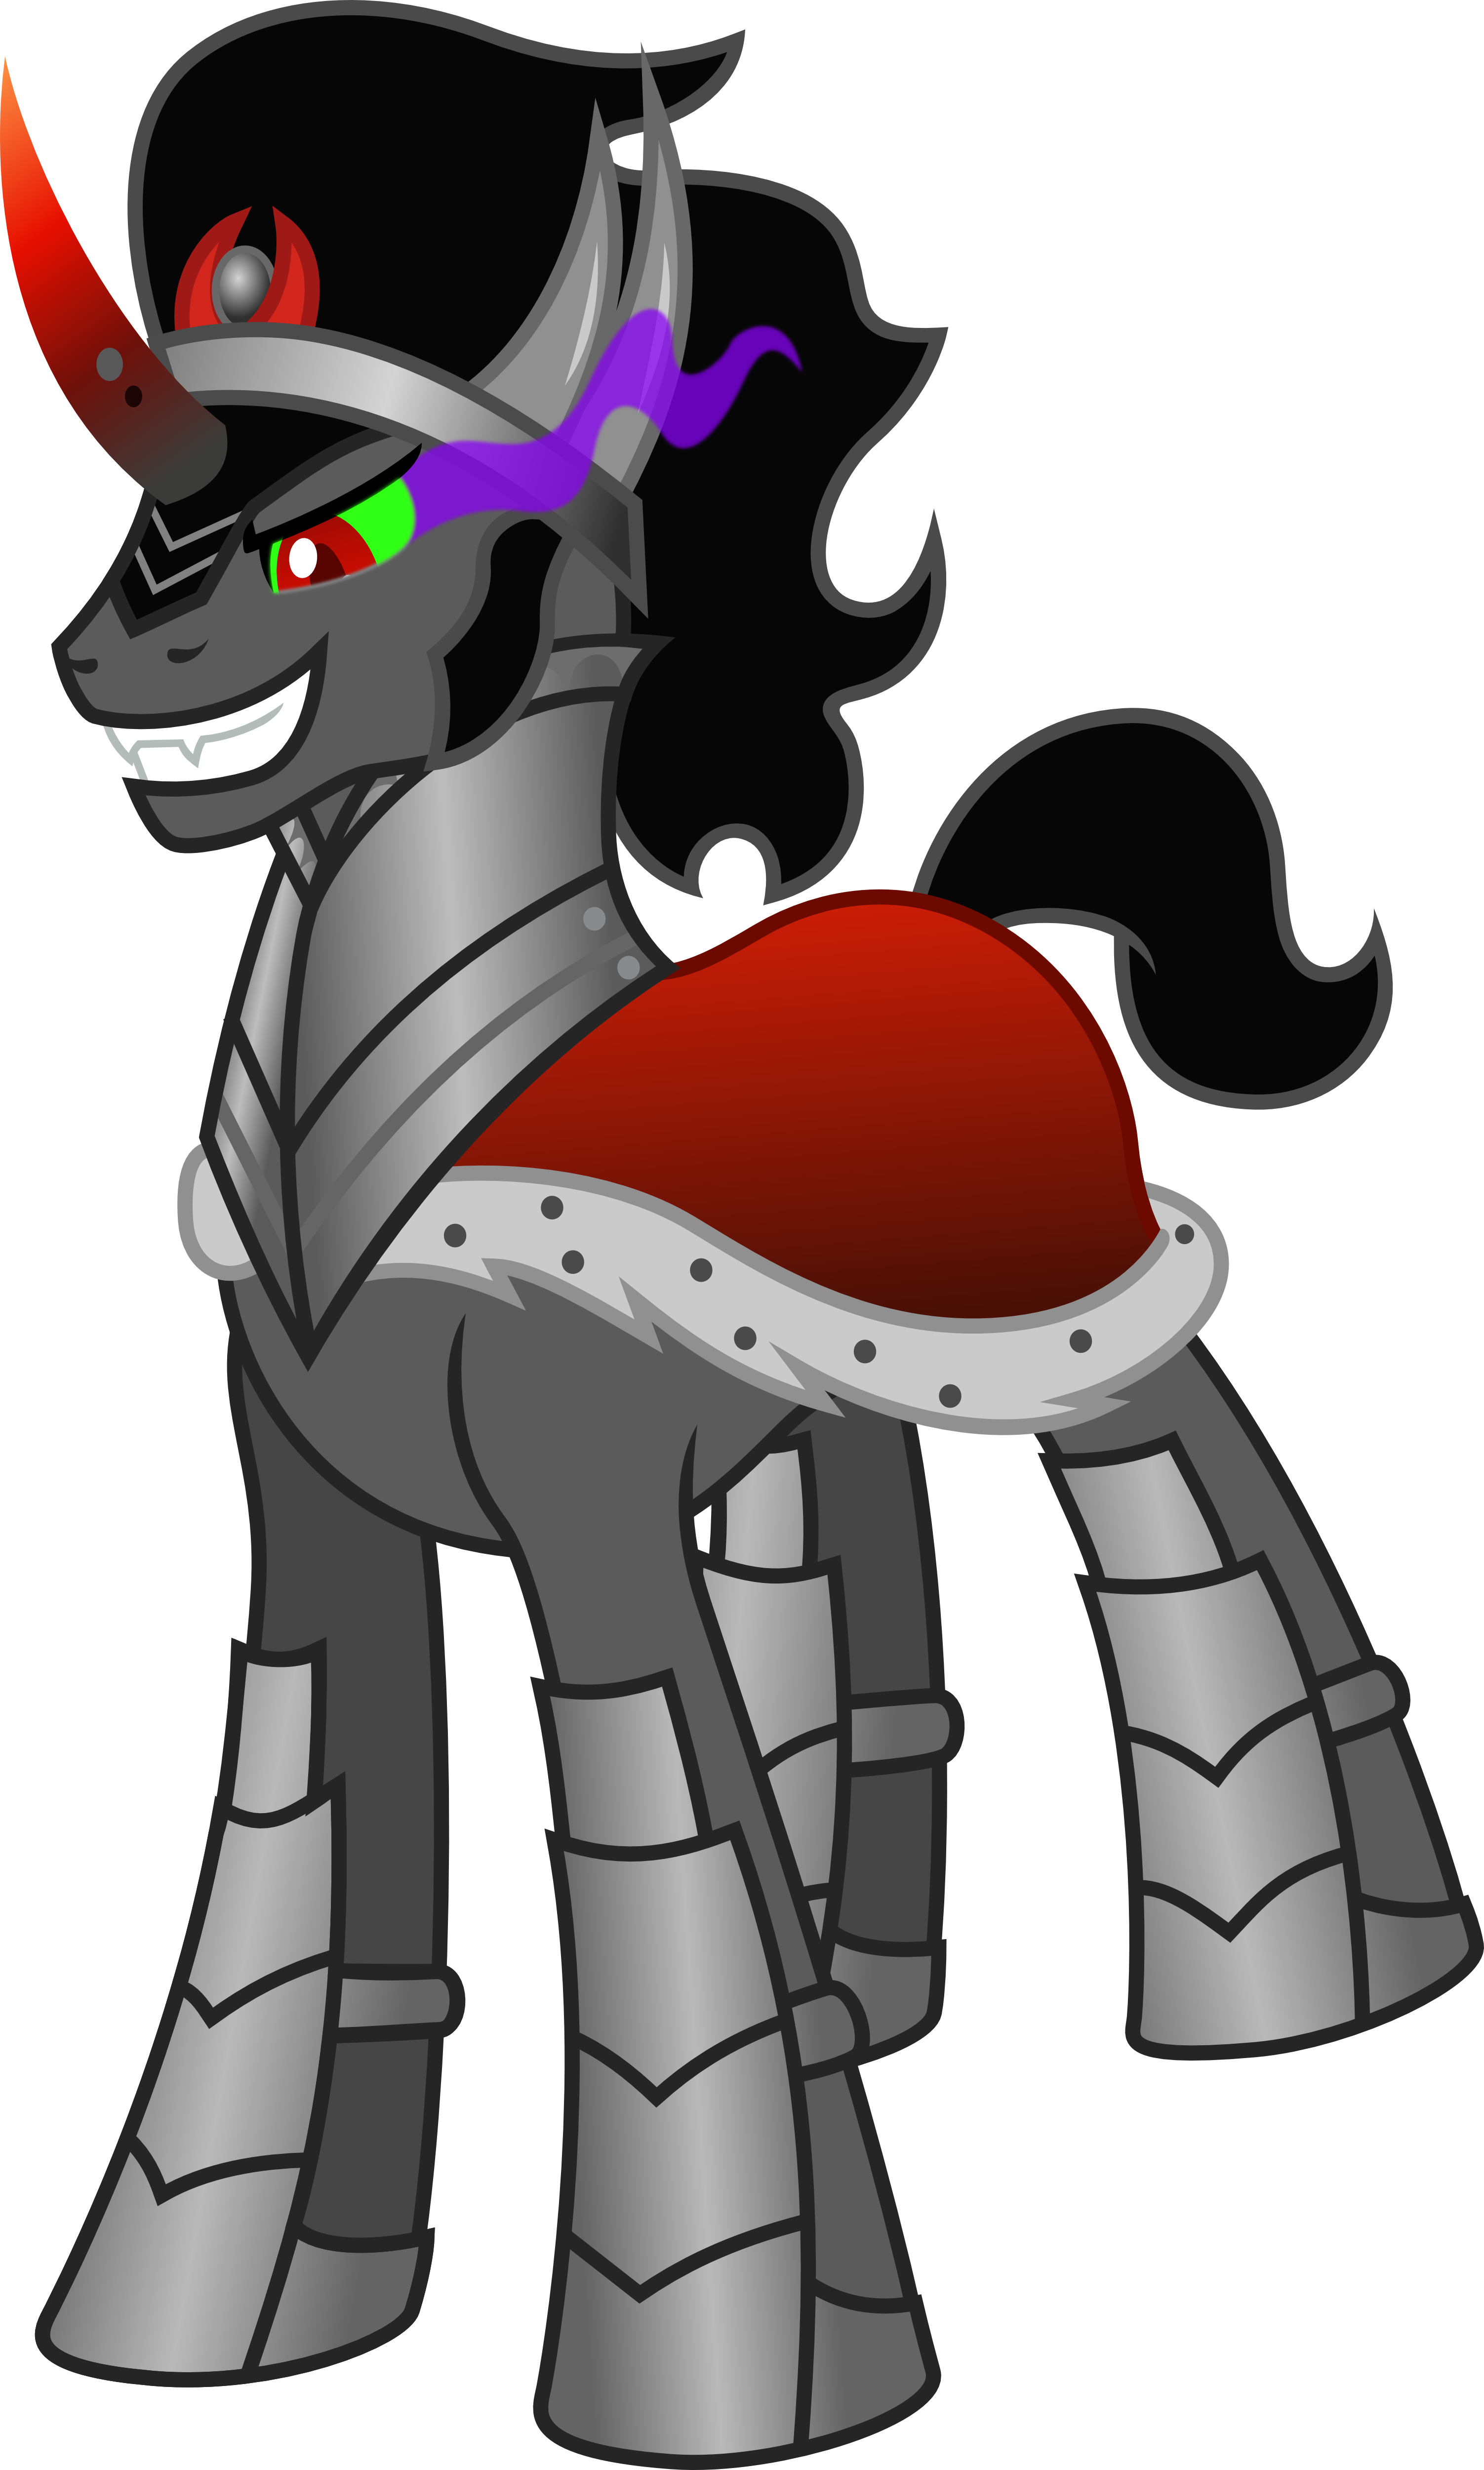 king_sombra_by_sallemcat-d9ftg1r.png